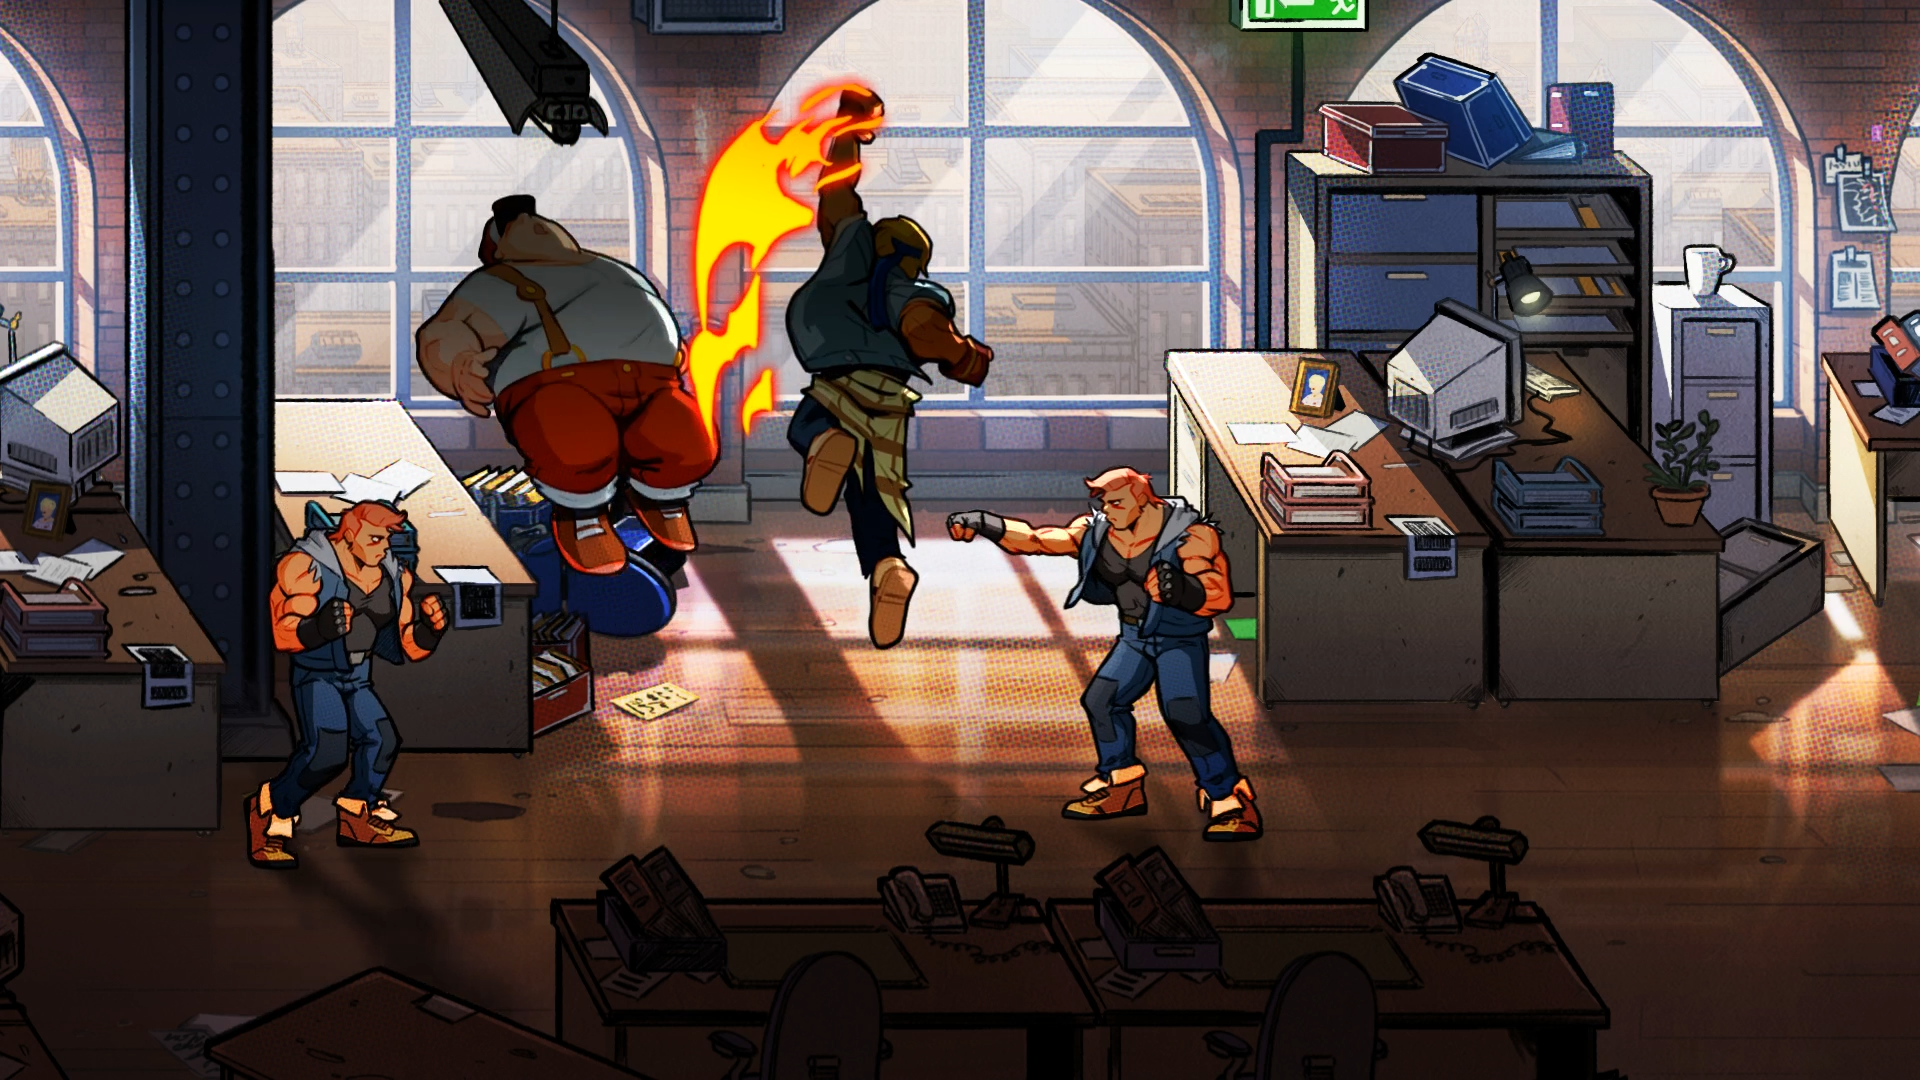 Streets of Rage 4 won't rely on its past to knock you out in